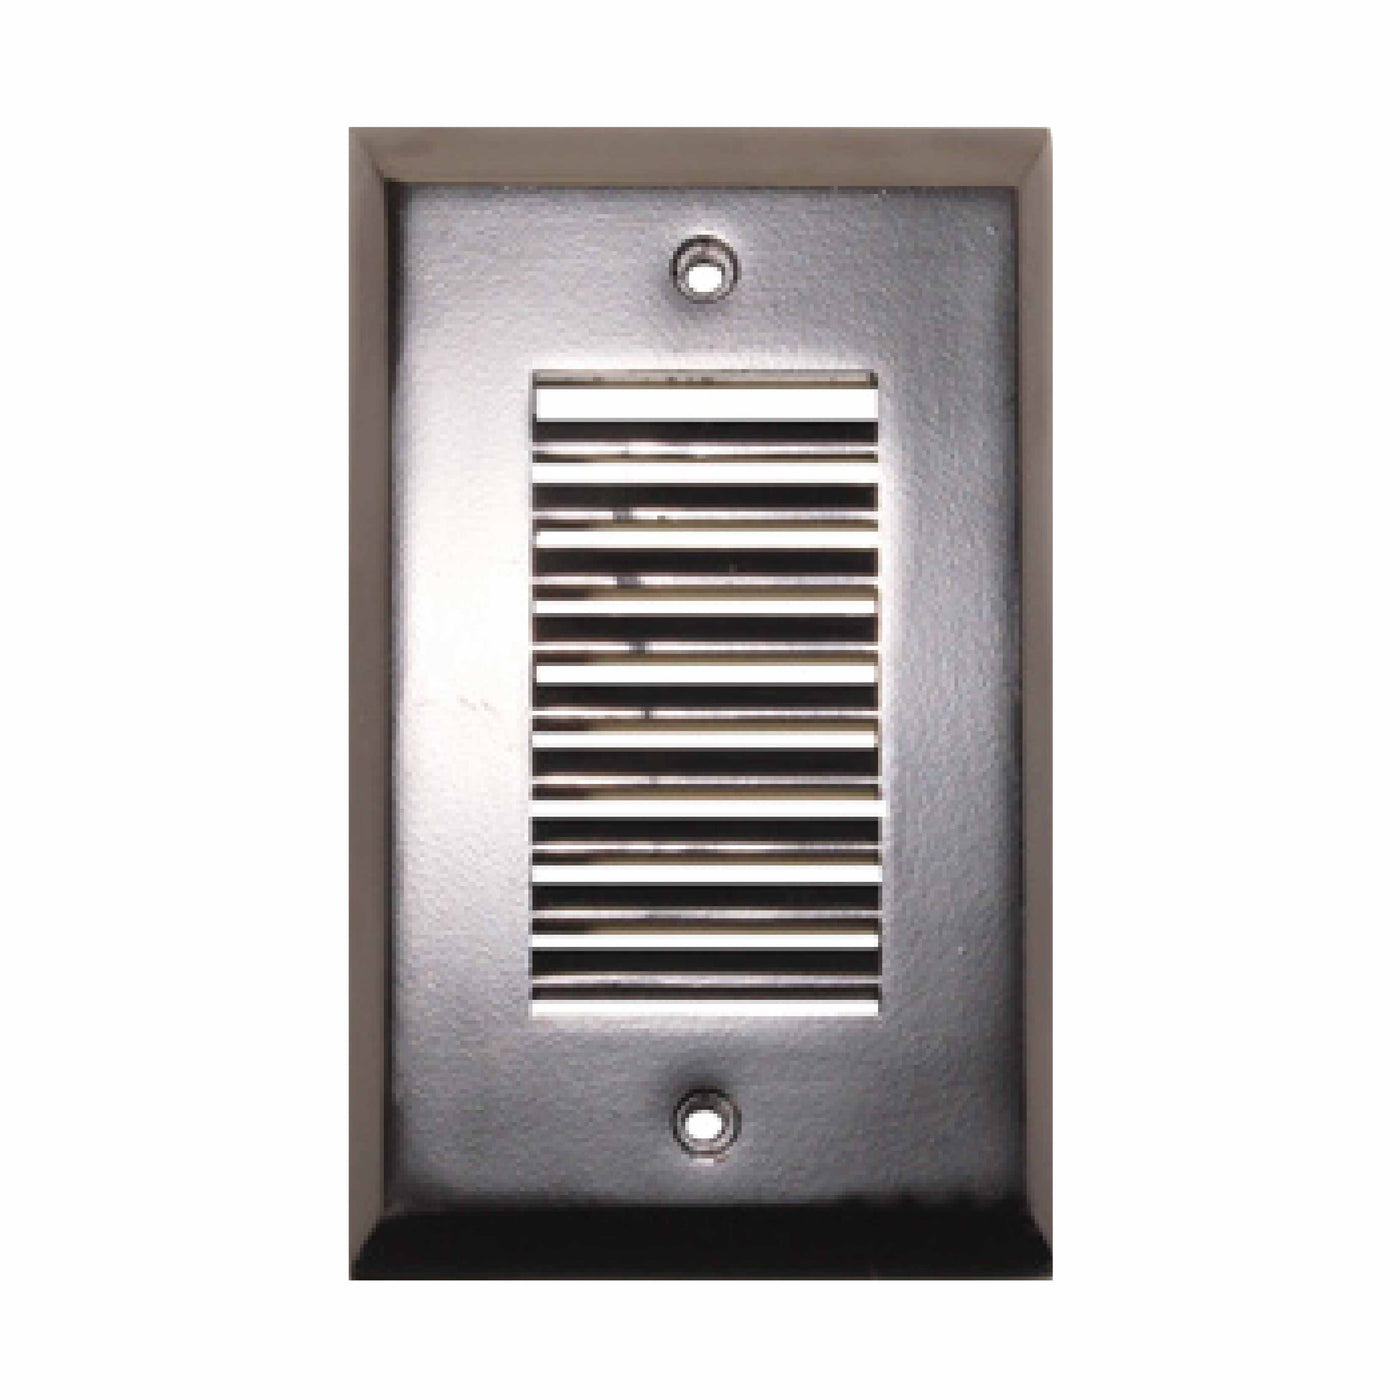 Westgate Step Light, 118 Lumens, 3W, 12V, Oiled Rubber Bronze, Brushed Nickel, White, or Antique Bronze Finish multiple Covers Available